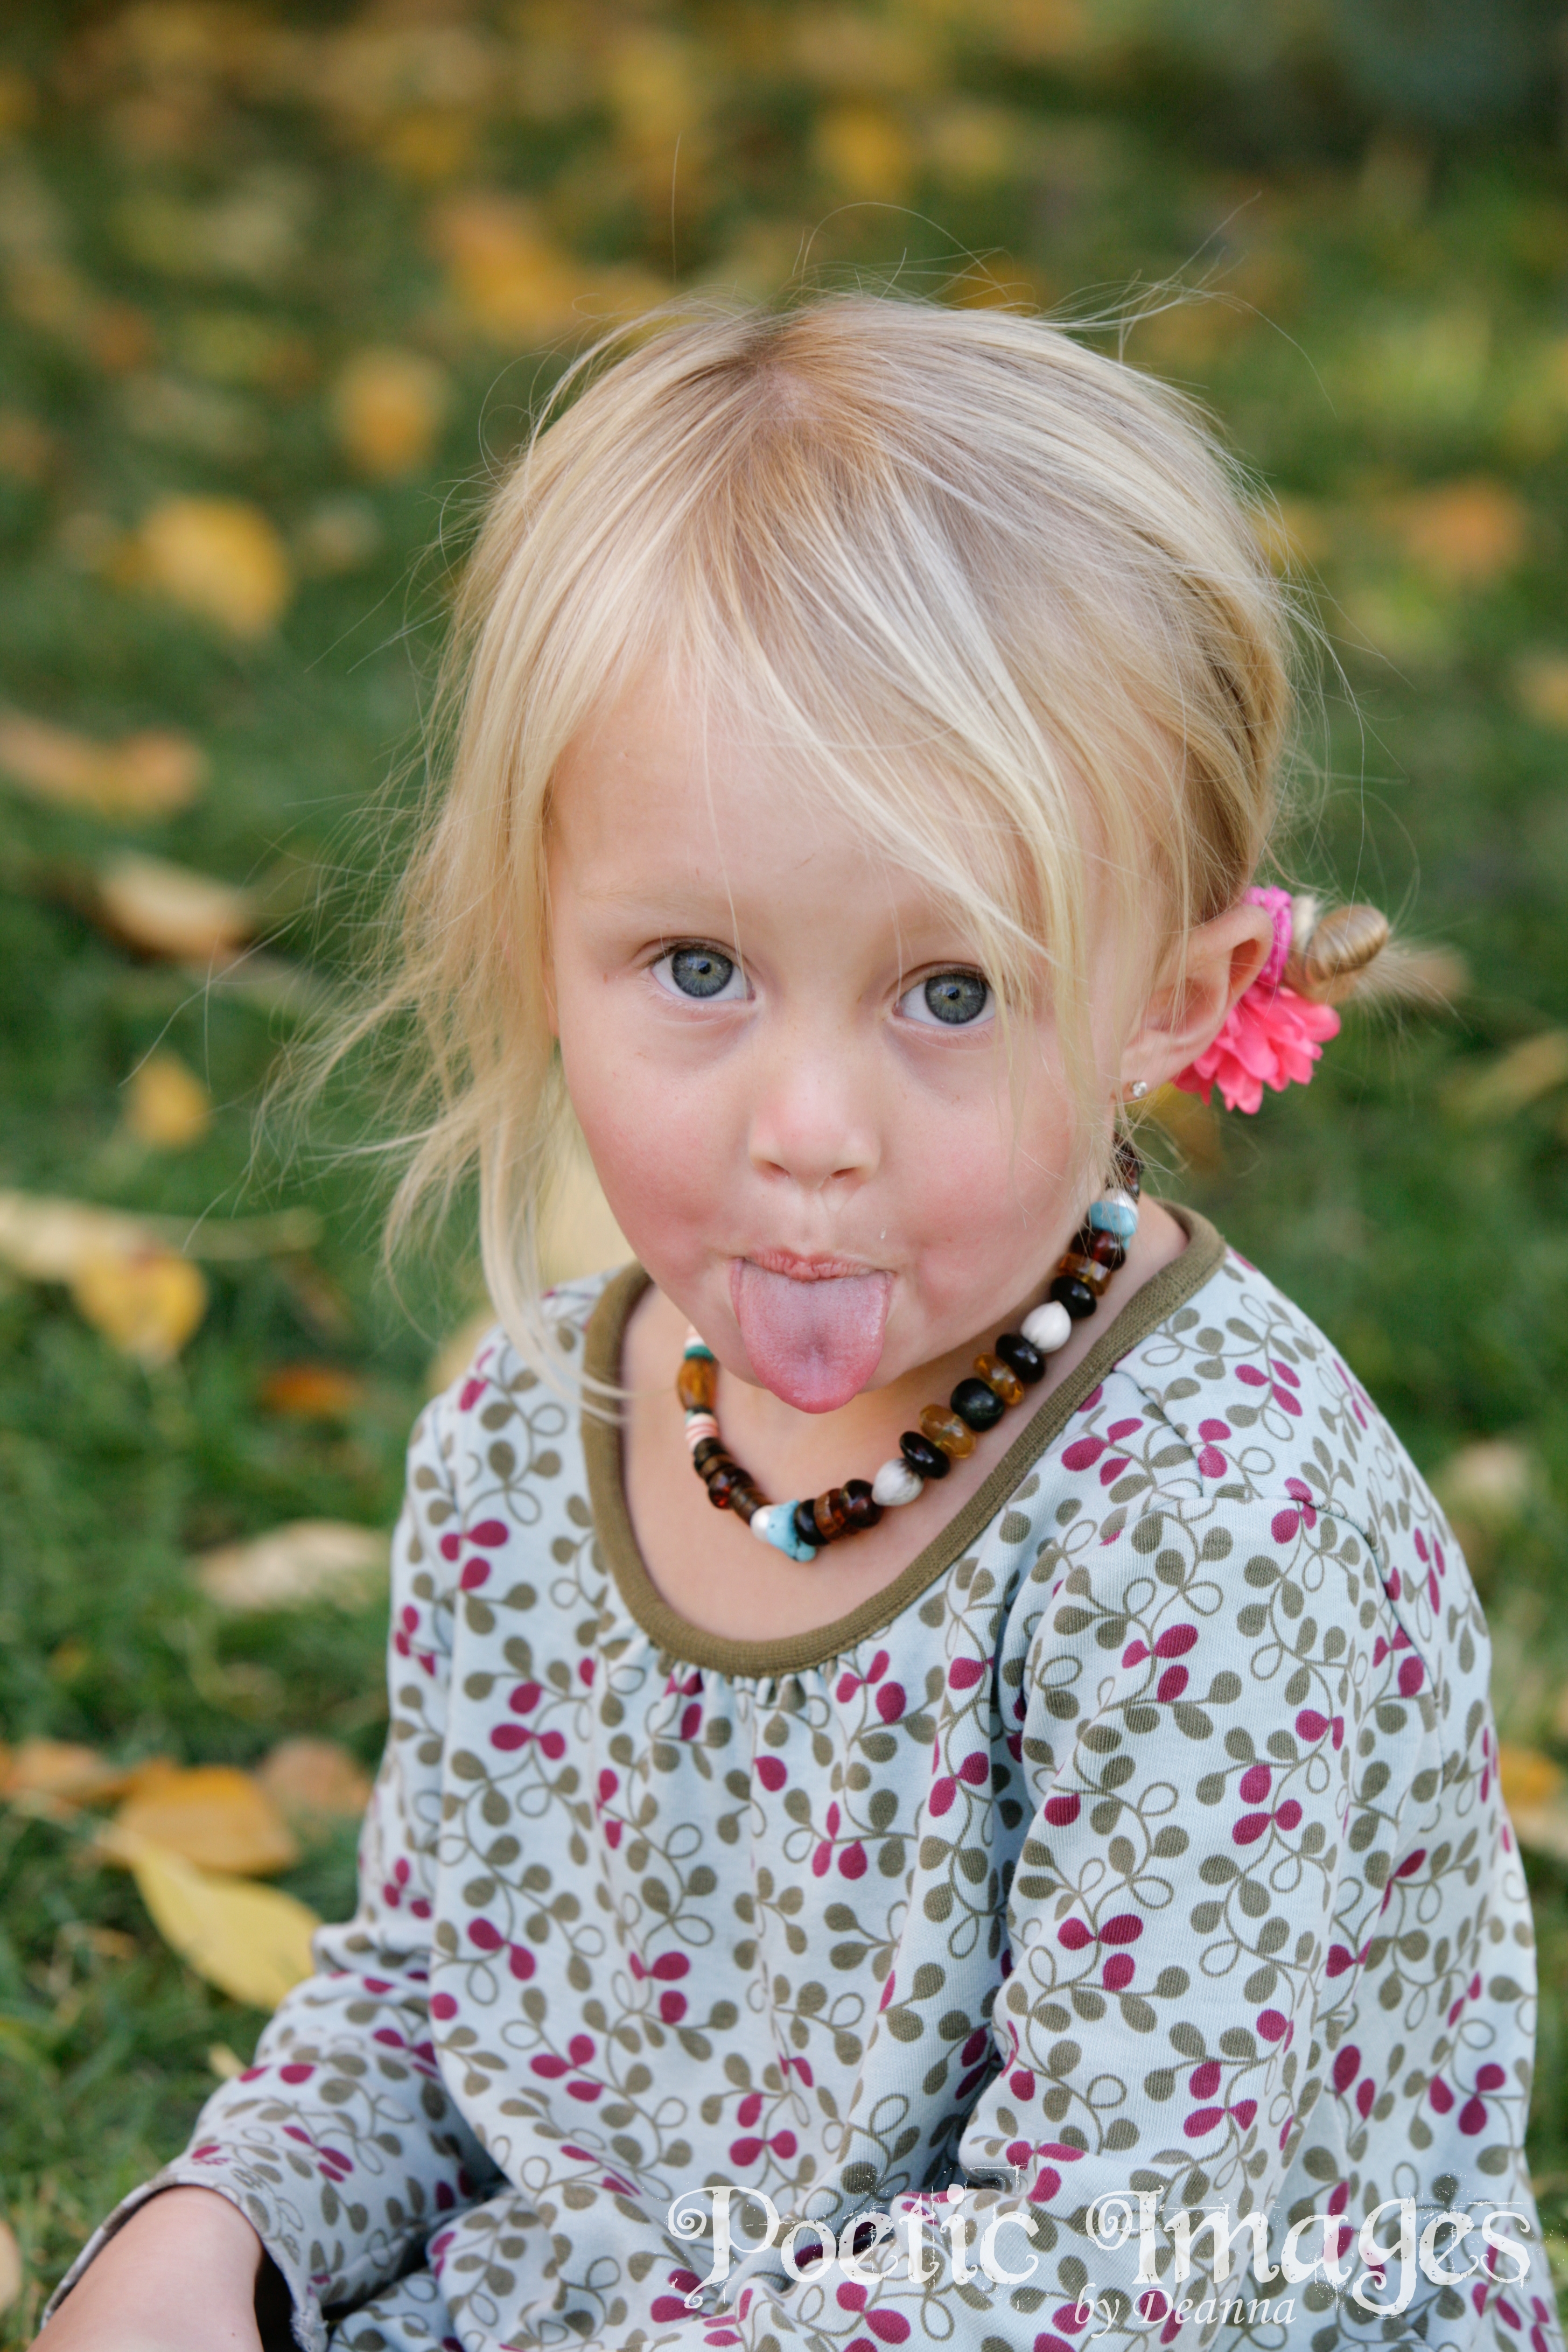 Children’s Portraits On-Location in Taos